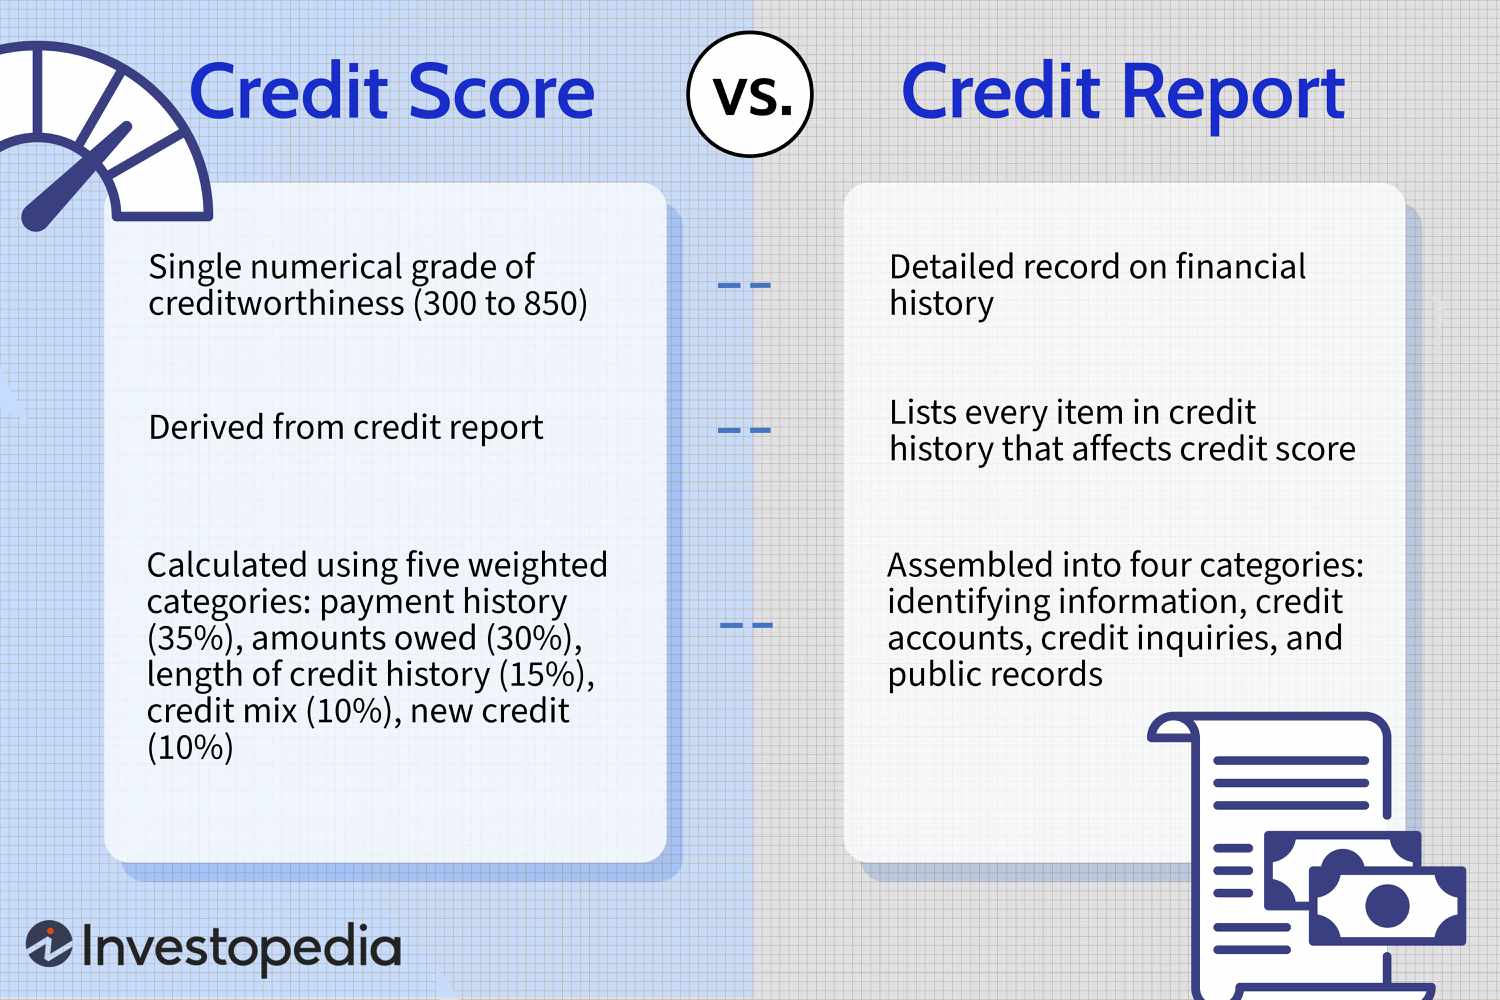 Is Credit Report And Credit Score The Same Thing?